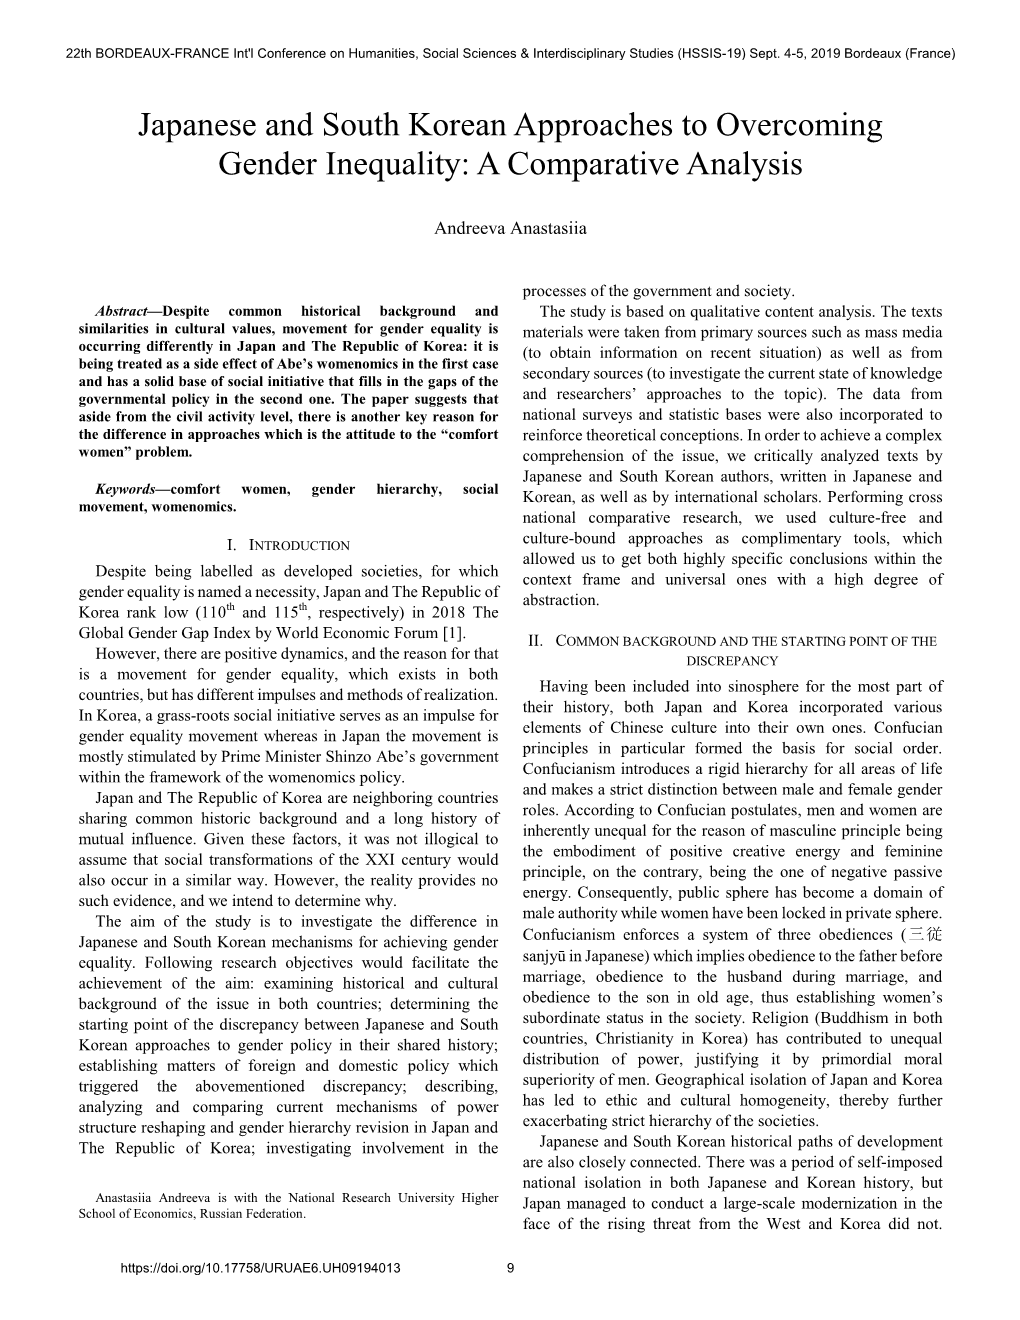 Japanese and South Korean Approaches to Overcoming Gender Inequality: a Comparative Analysis